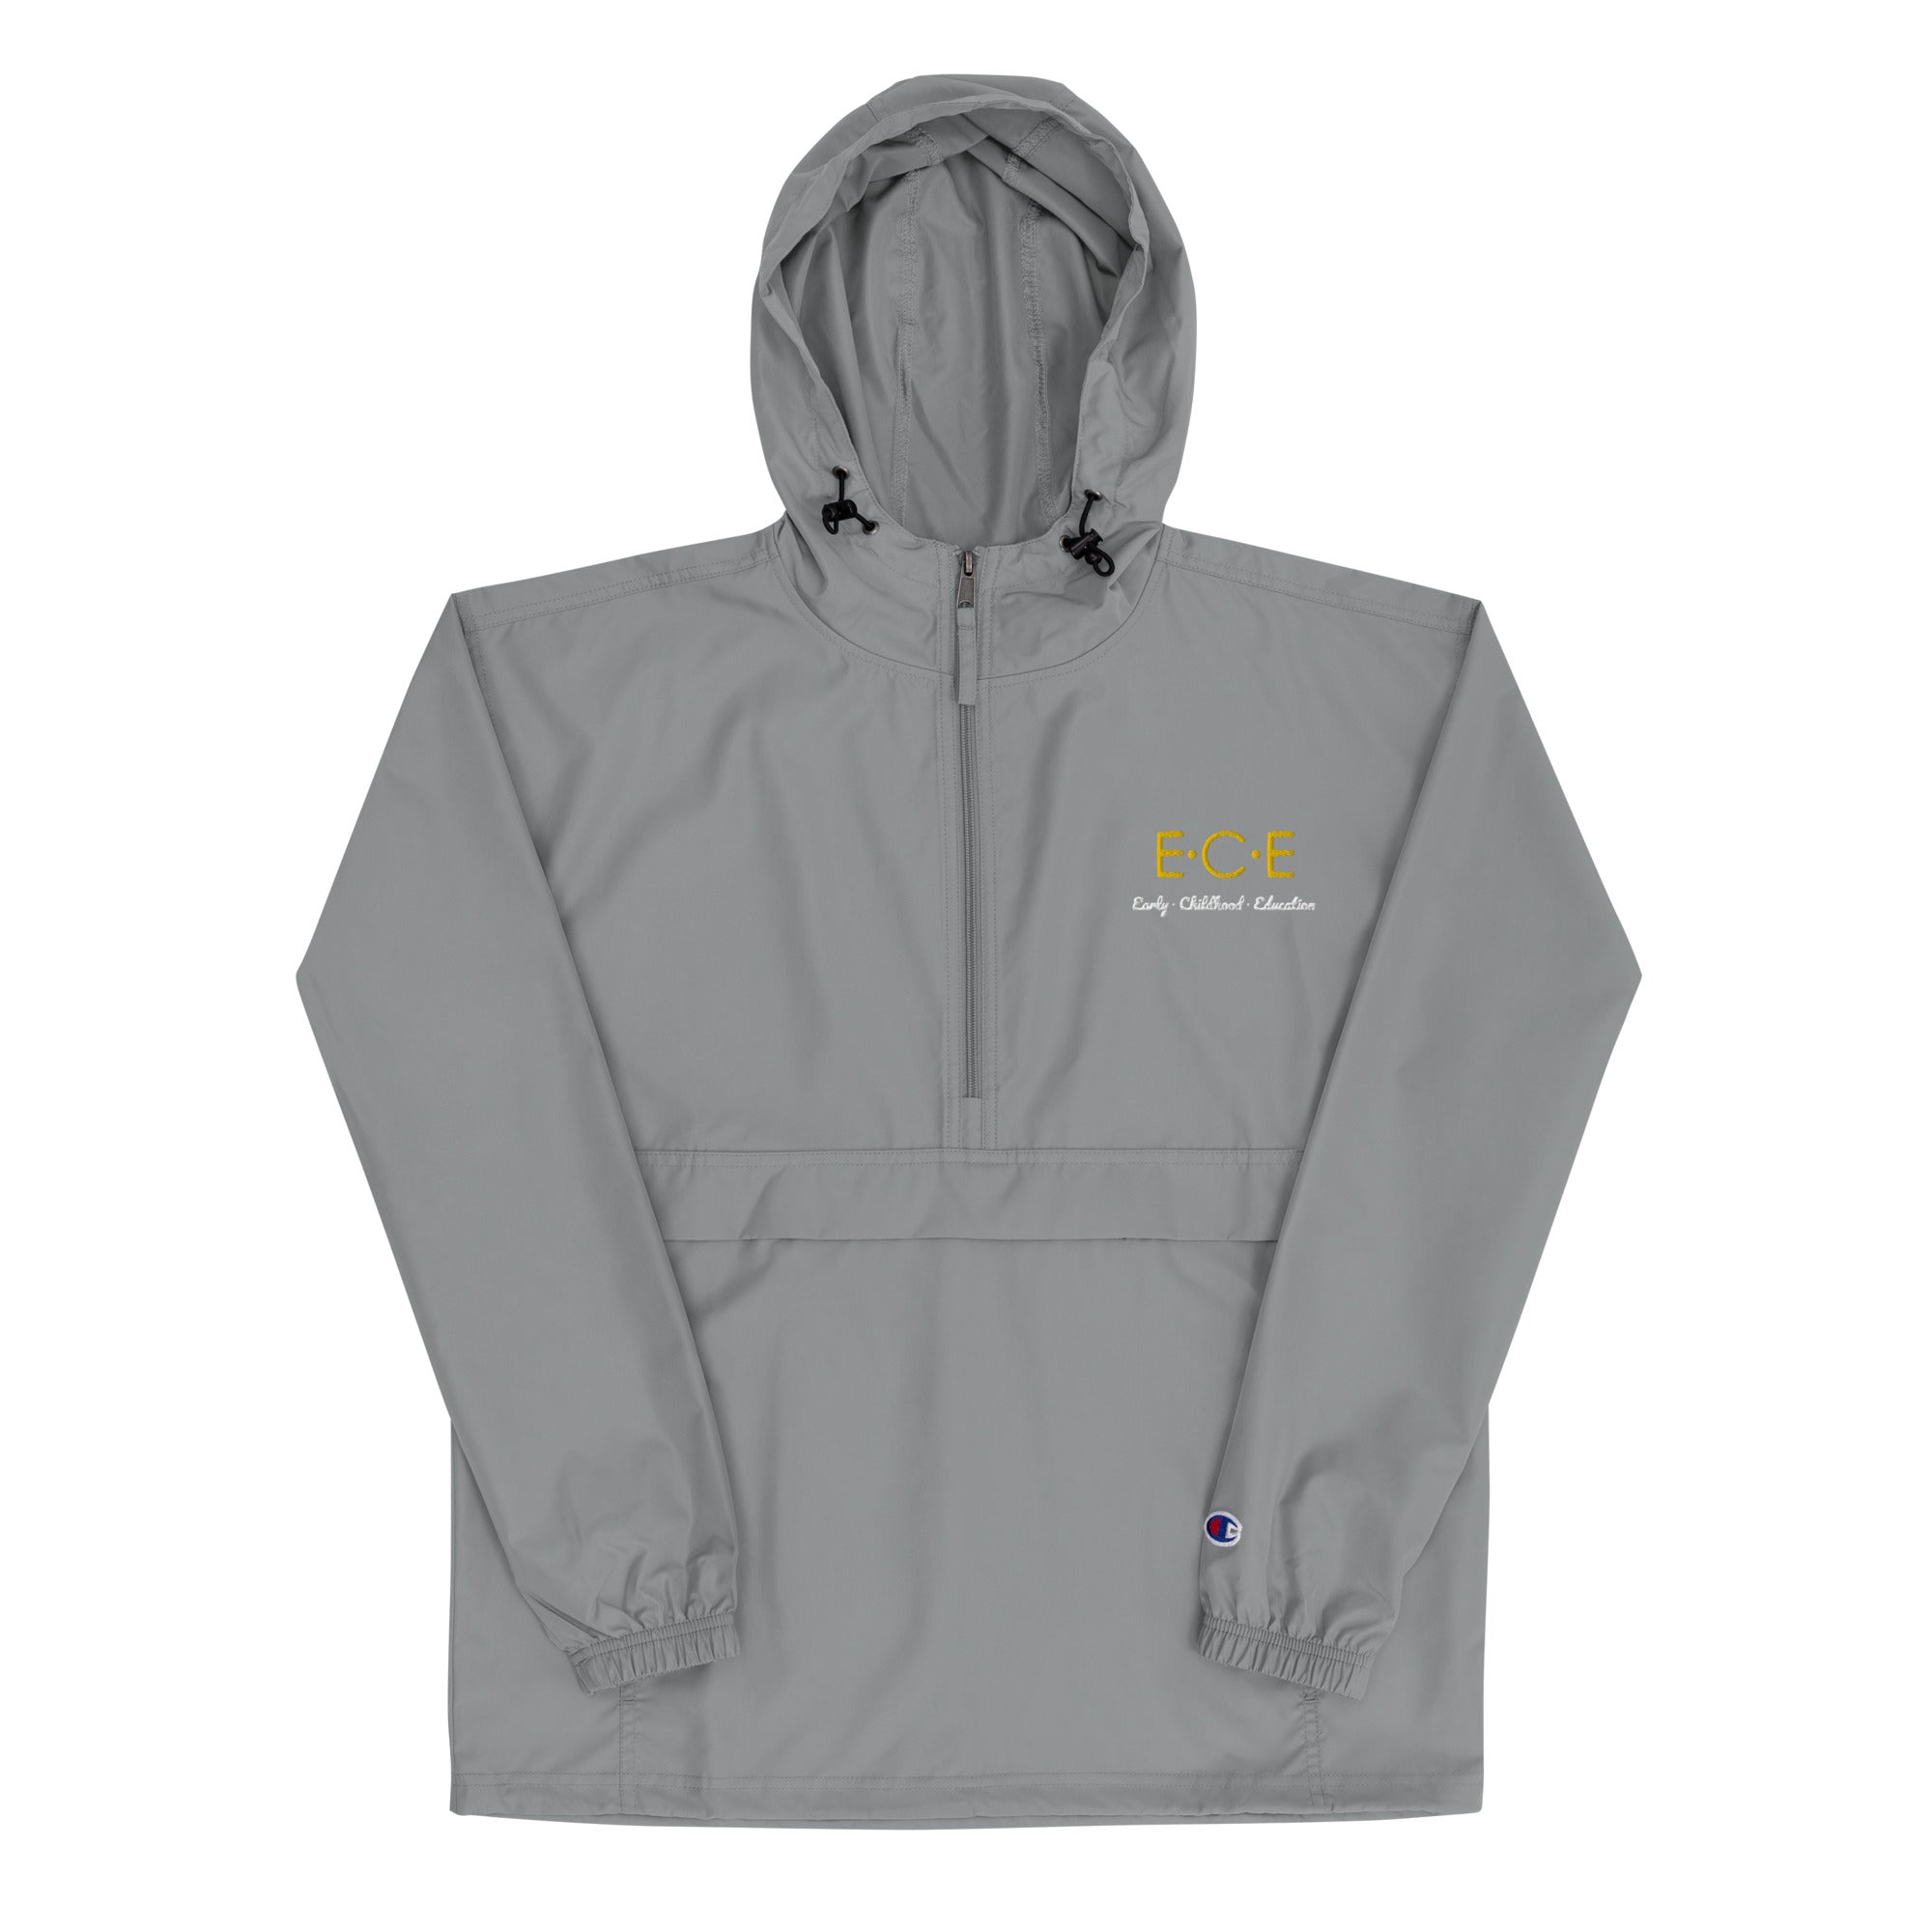 ECE Embroidered Champion Packable Jacket